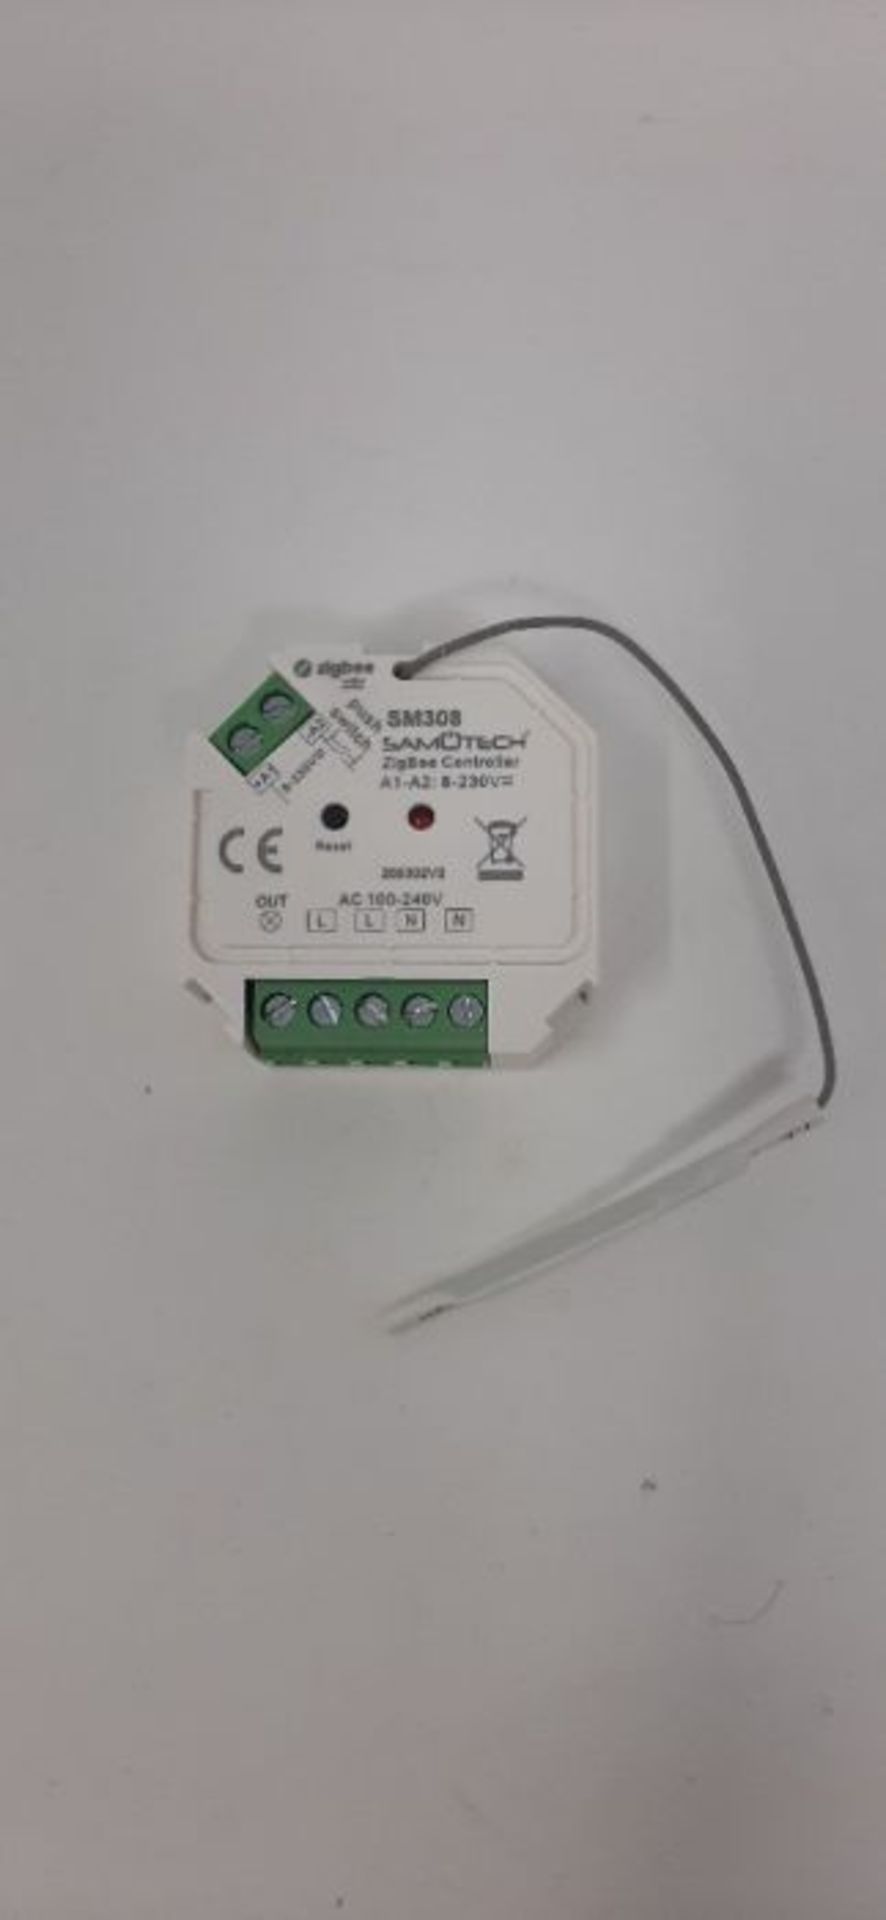 Samotech Zigbee Switches and Dimmers (1-Pack SM308) - Image 2 of 2